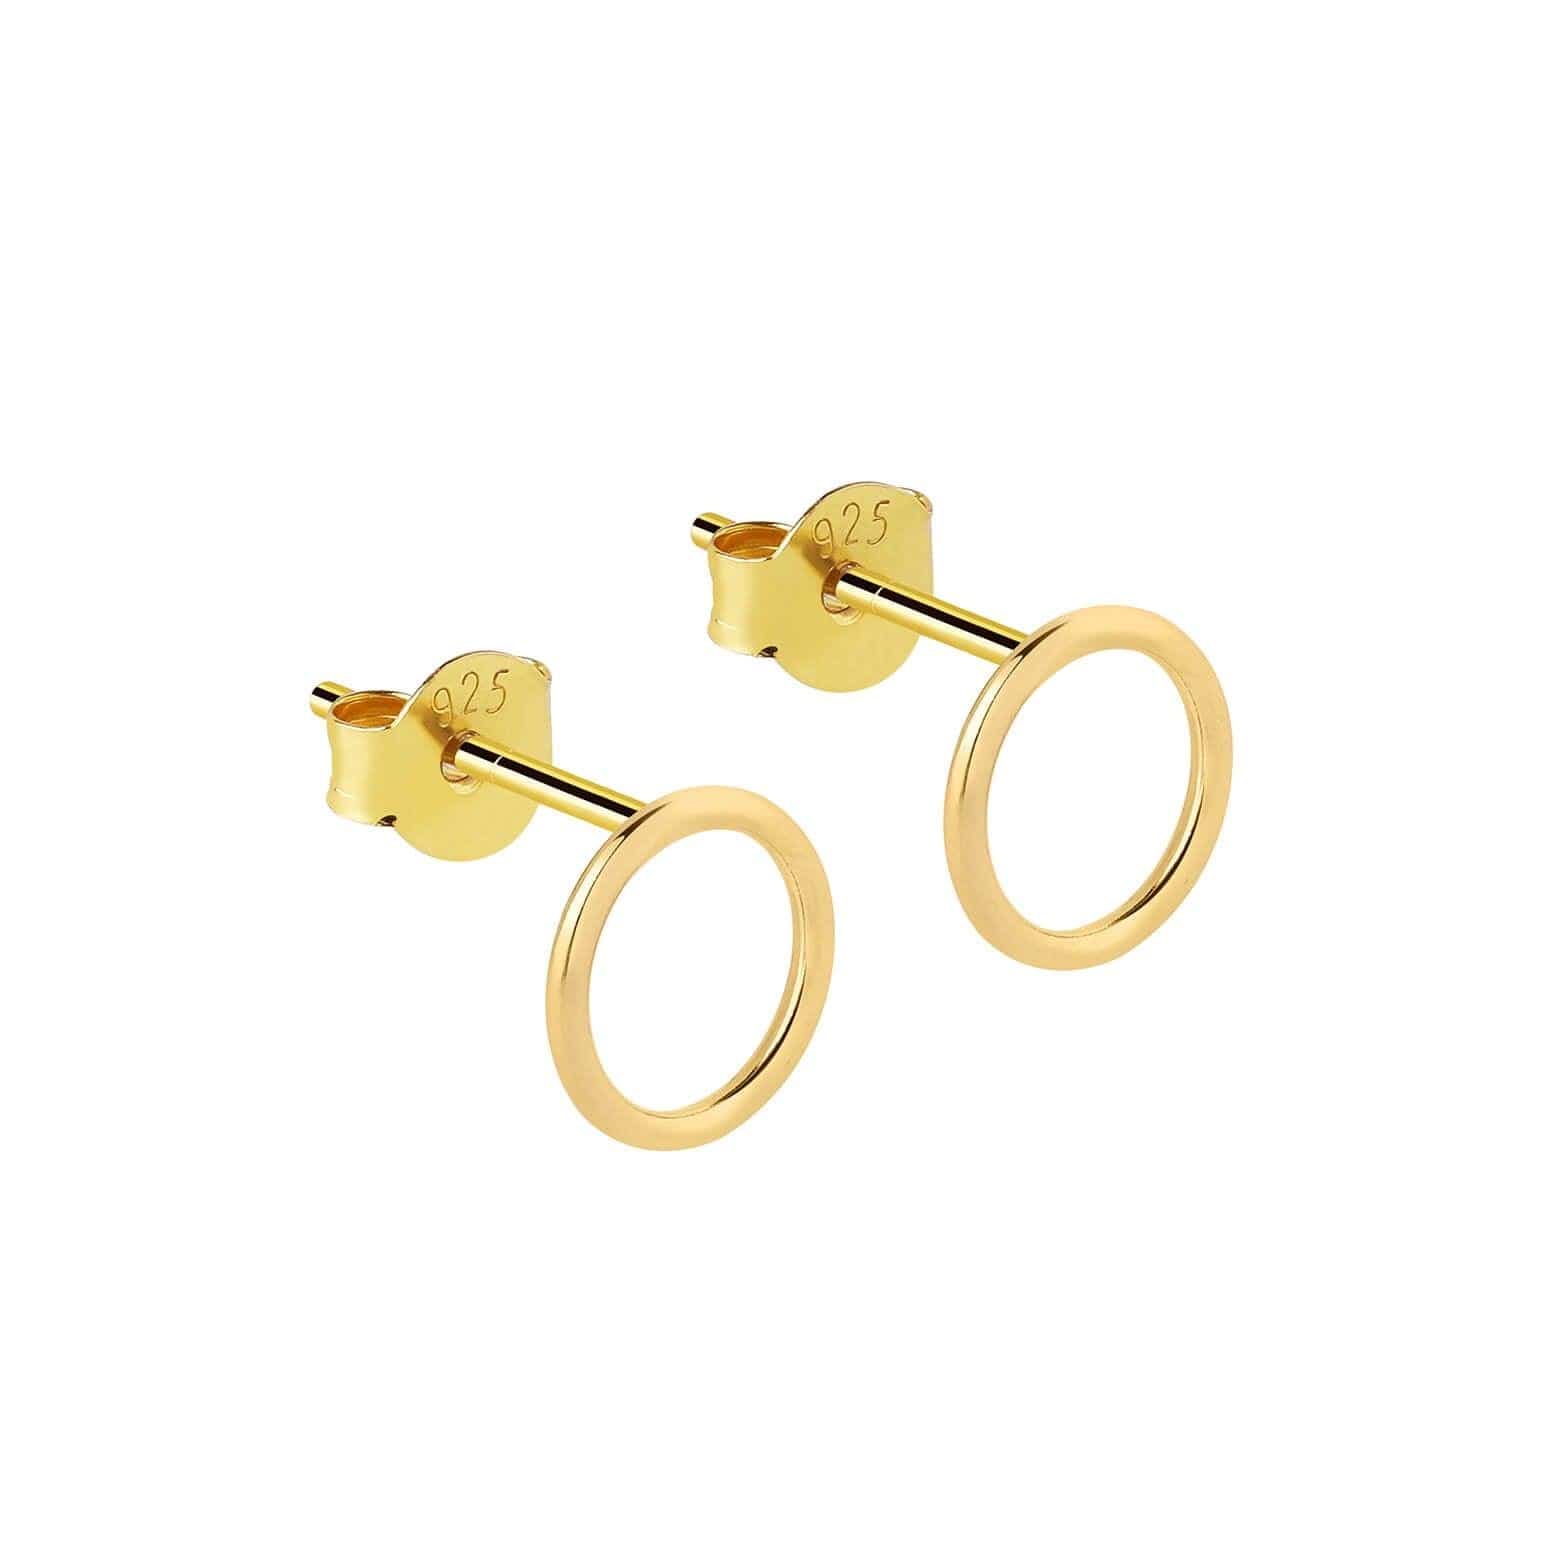 Gold Plated Circle Stud Earrings 3mm